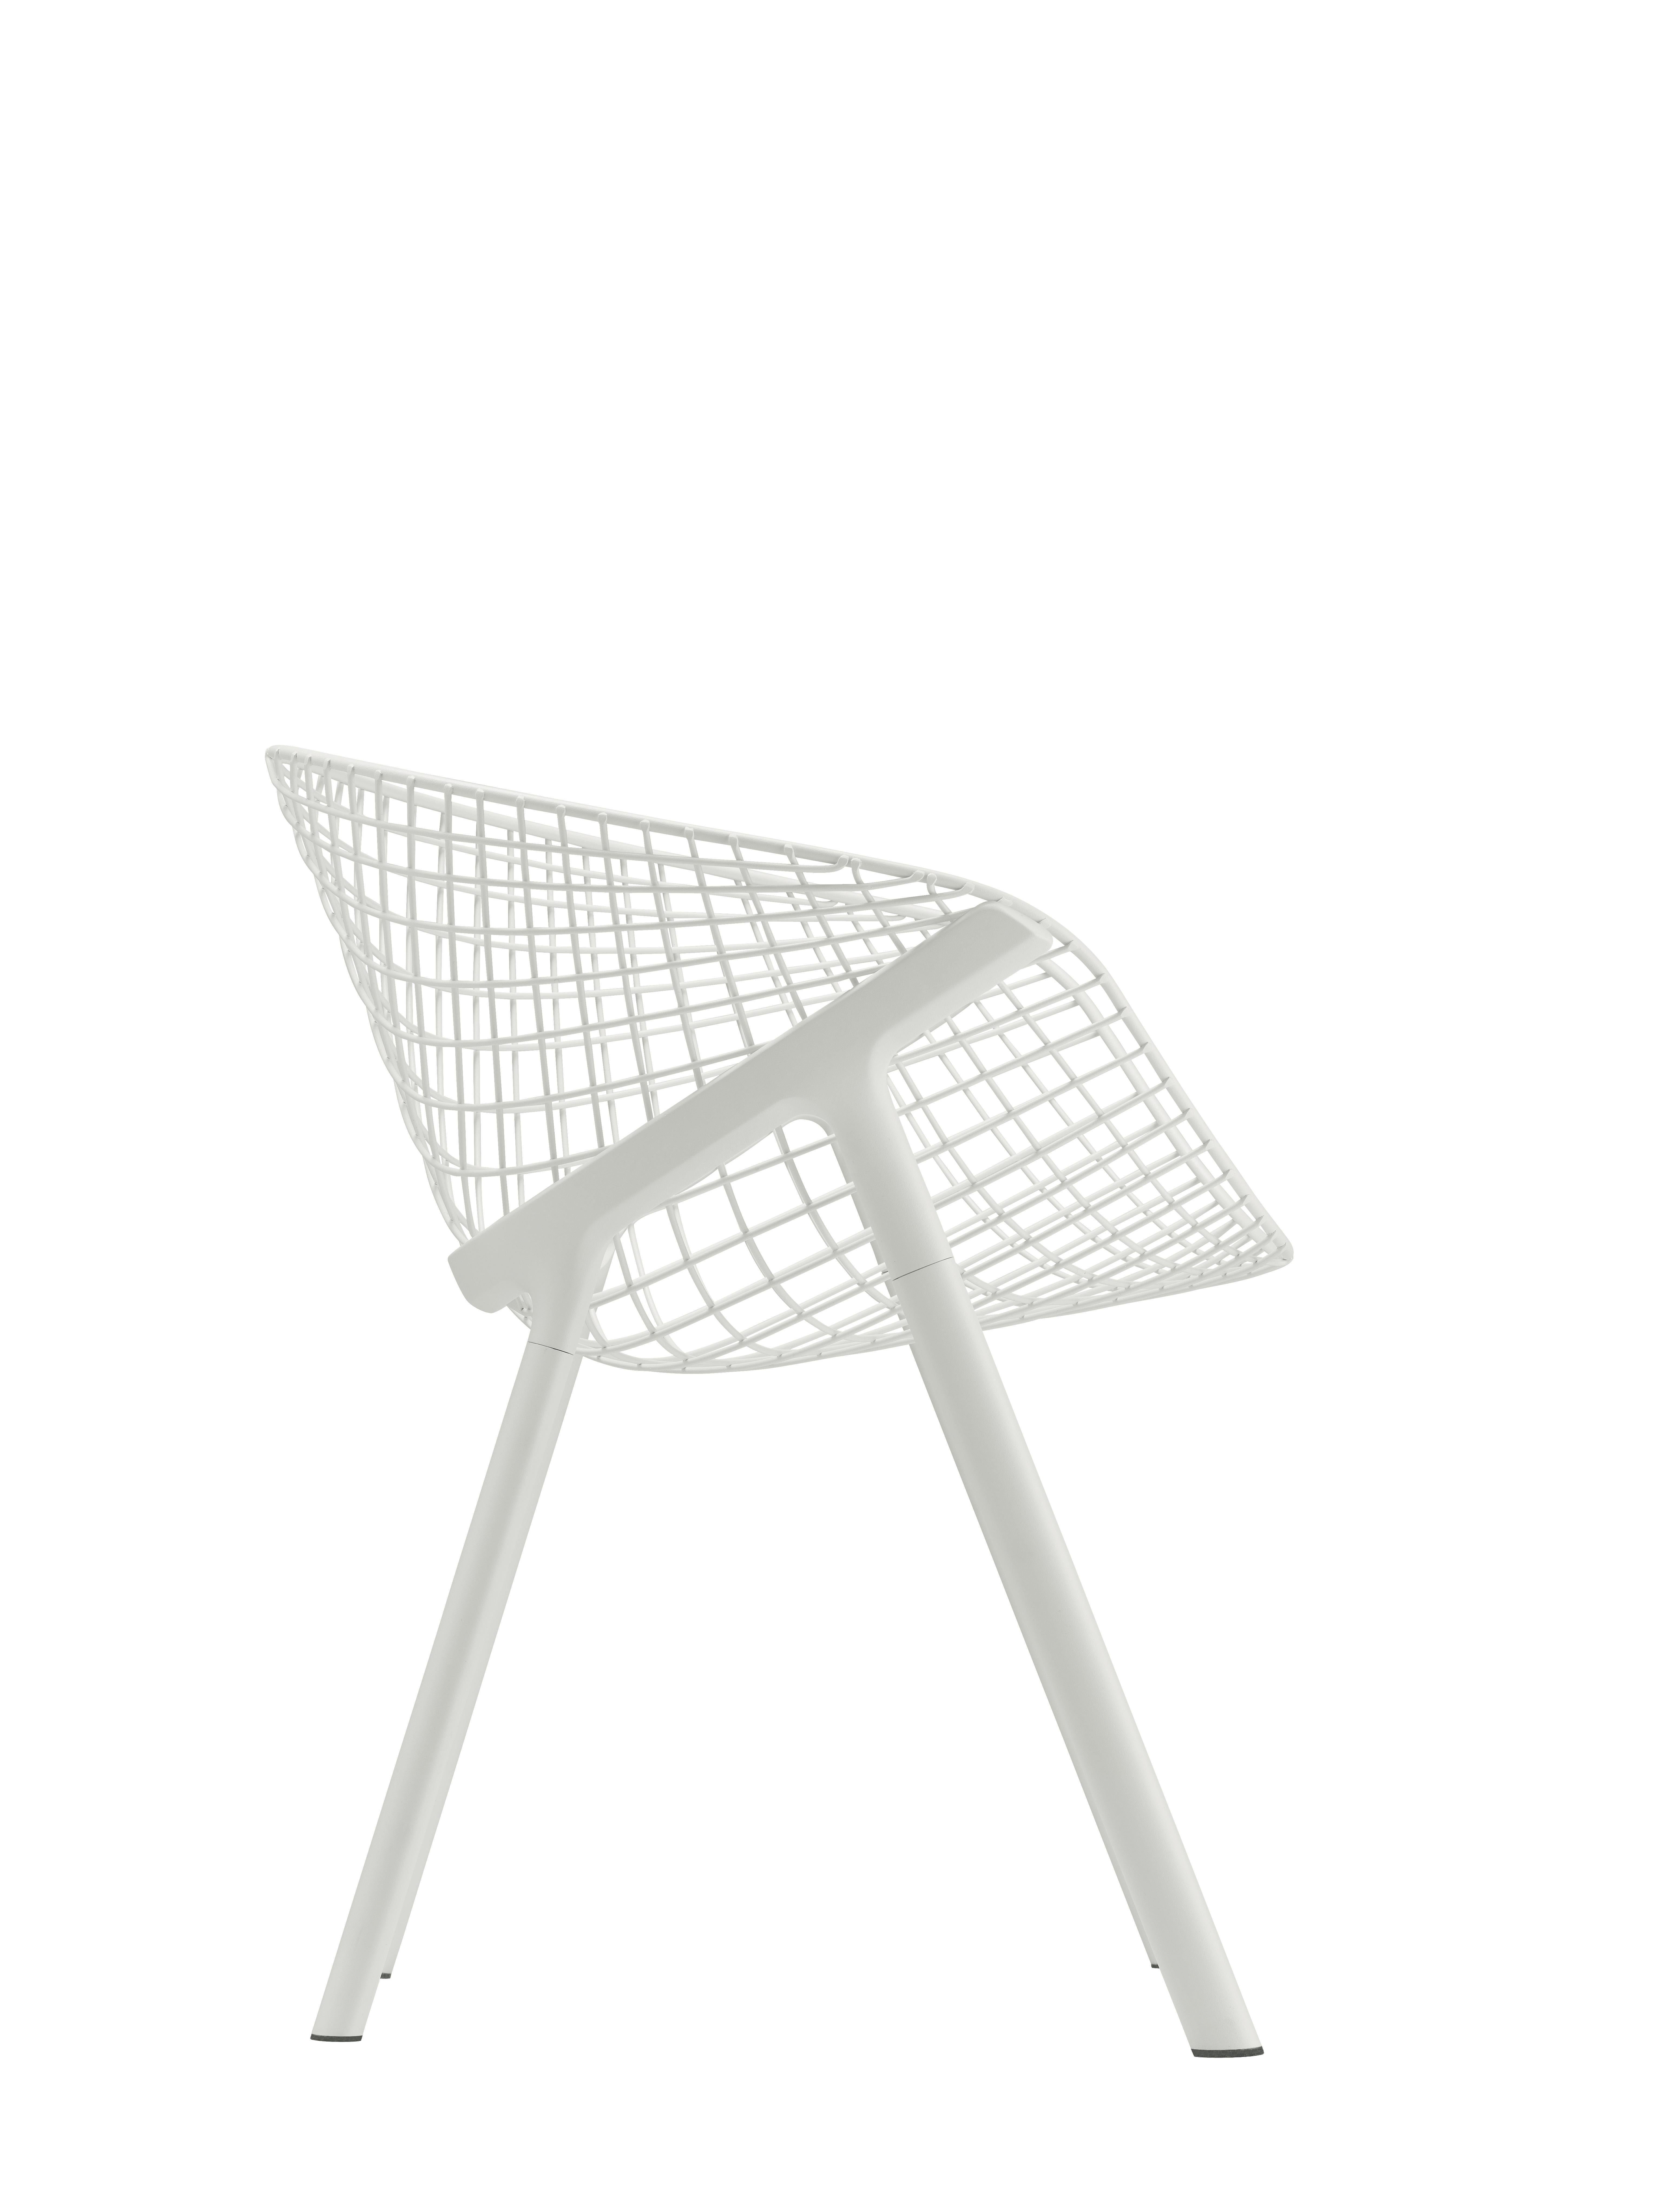 Italian Alias 040 Kobi Chair in White Lacquered Aluminum Frame by Patrick Norguet For Sale